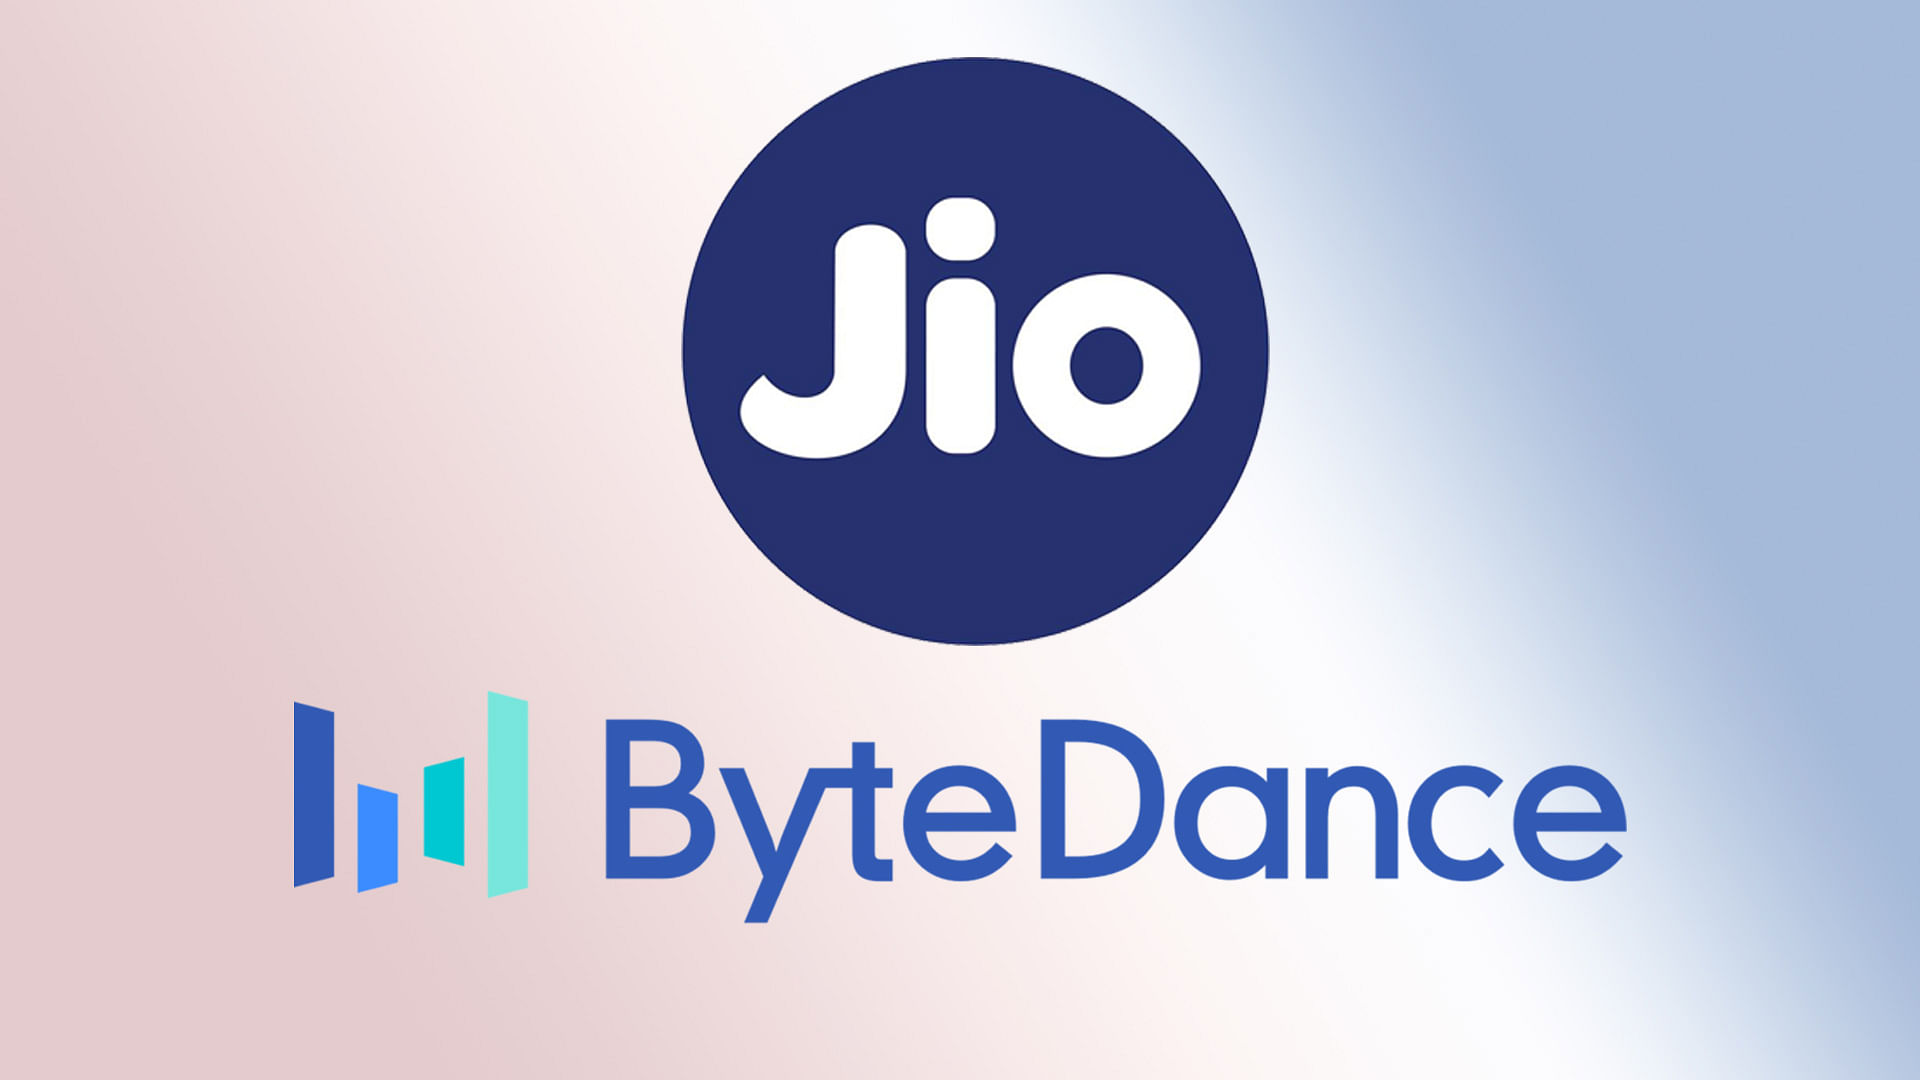 ByteDance could sell its India business to Reliance Jio.